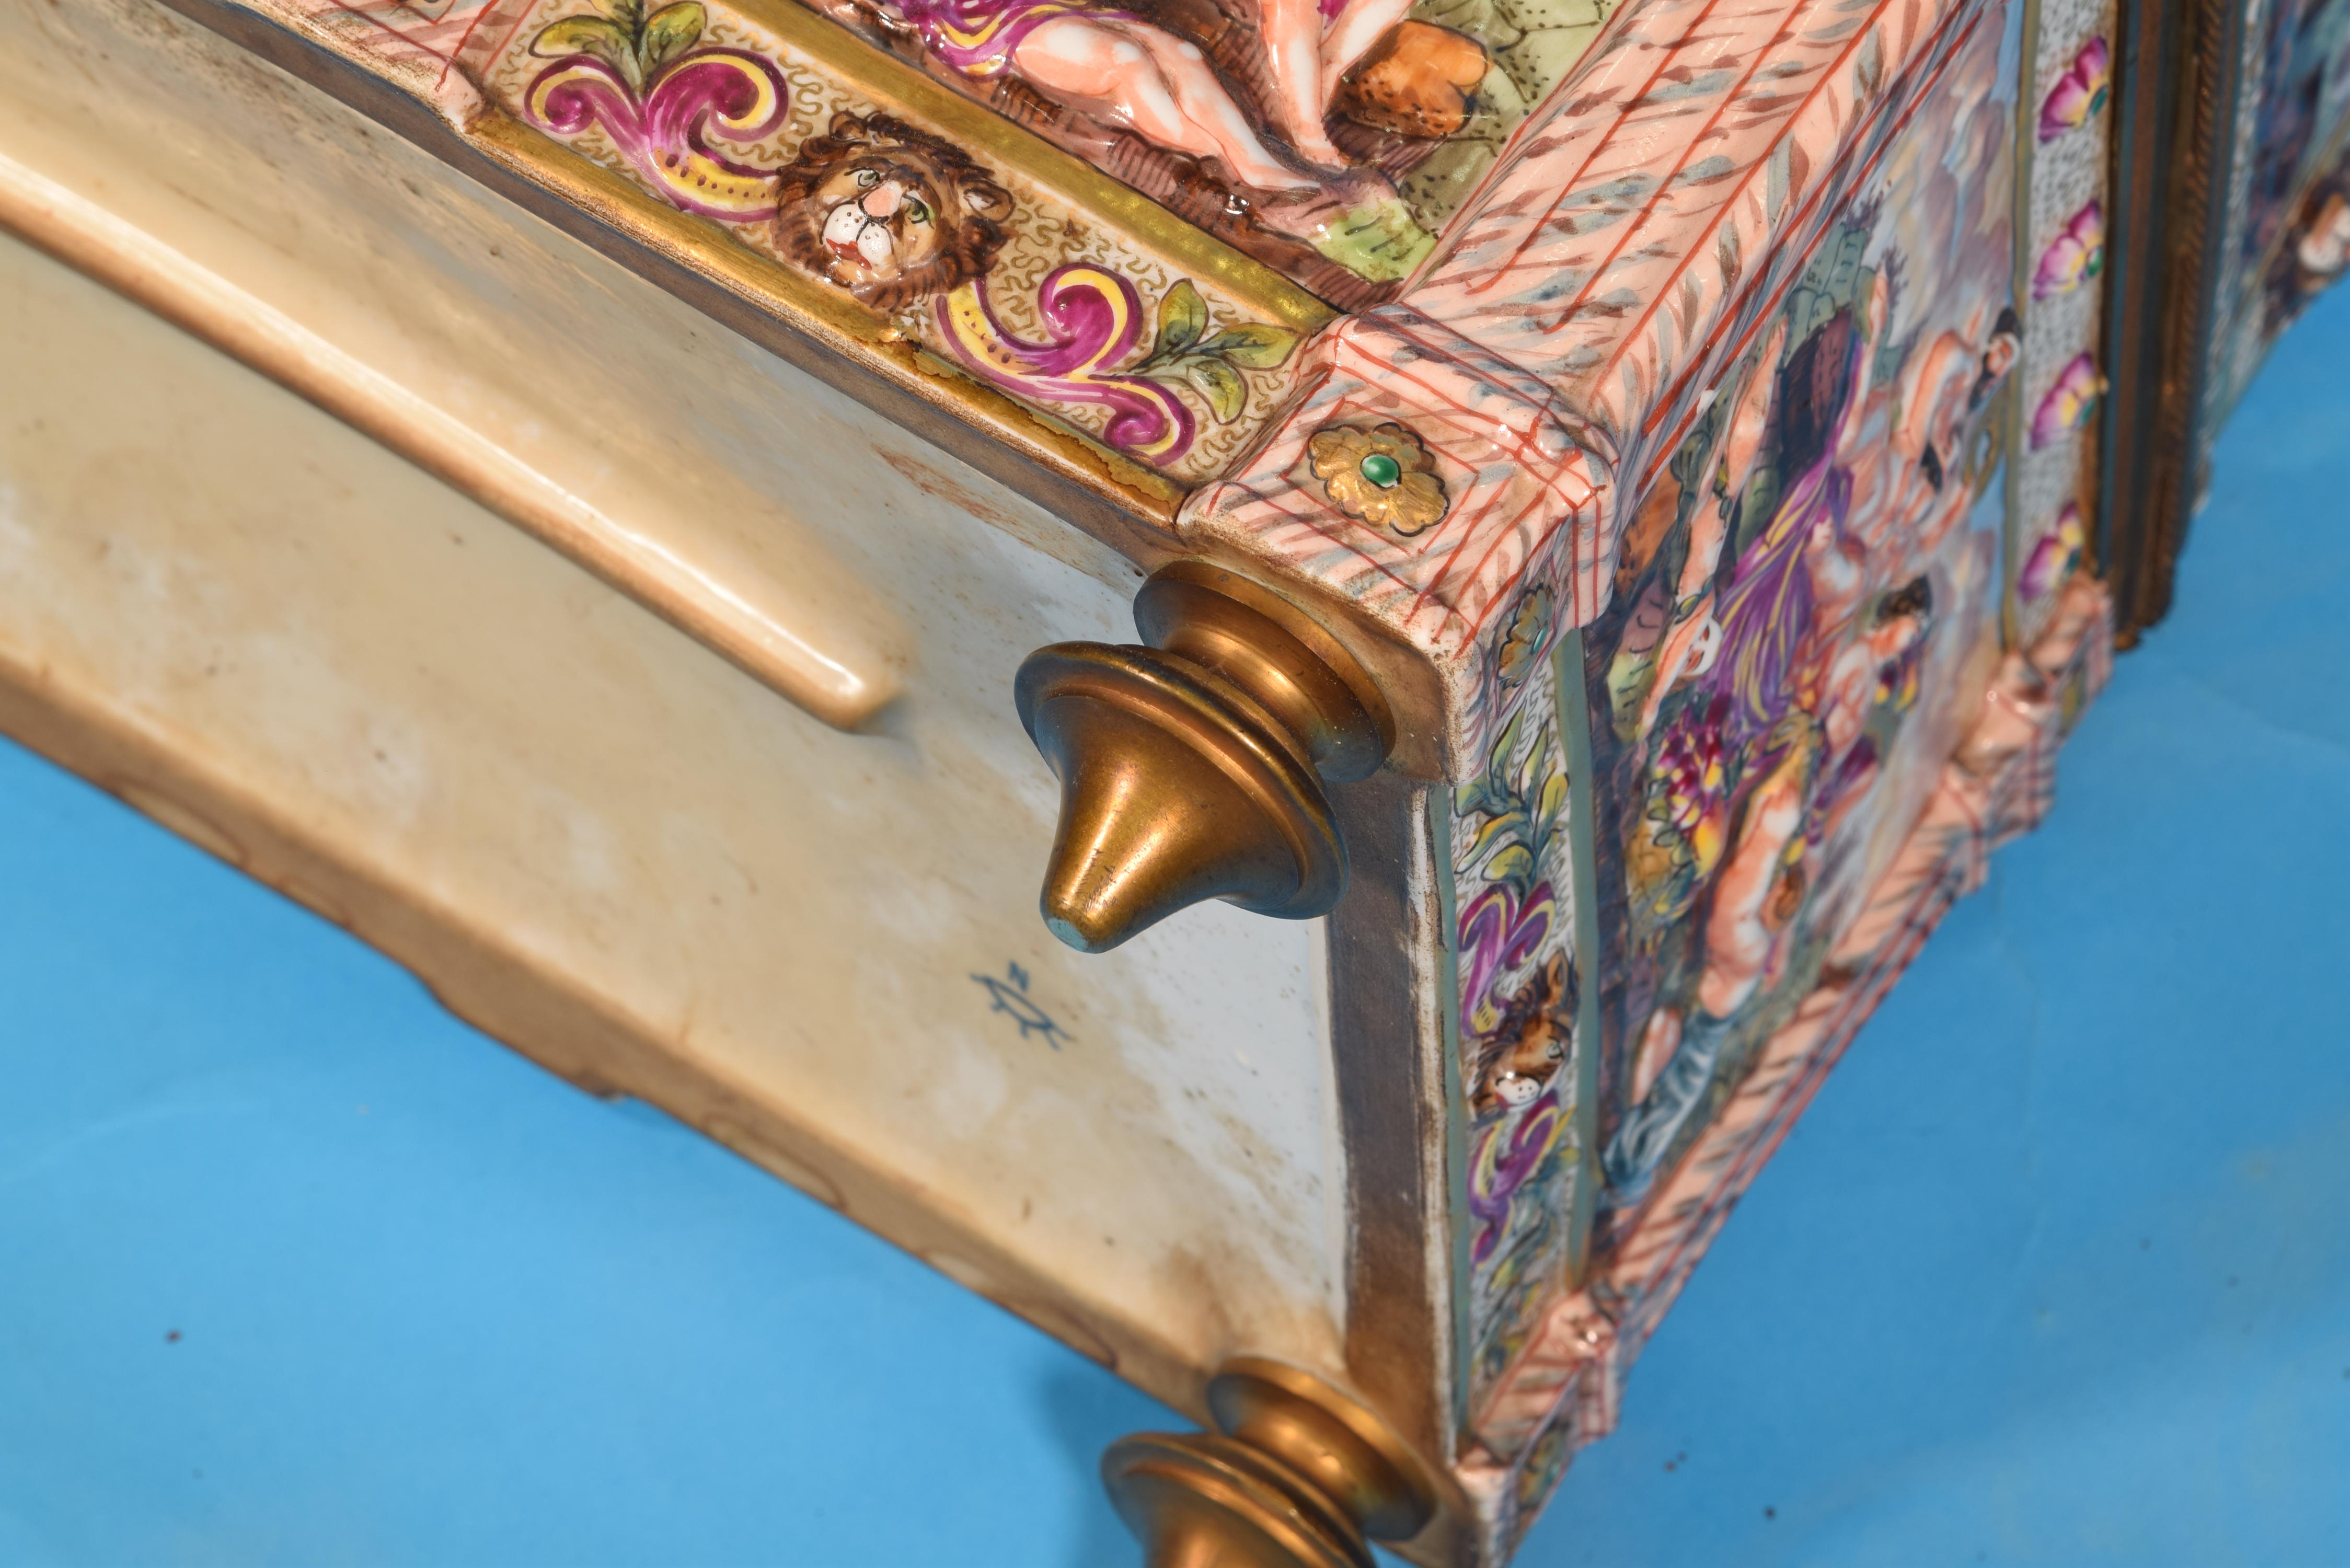 Italian Capodimonte Porcelain Chest or Jewelry Box, Italy, 19th Century, with Marks